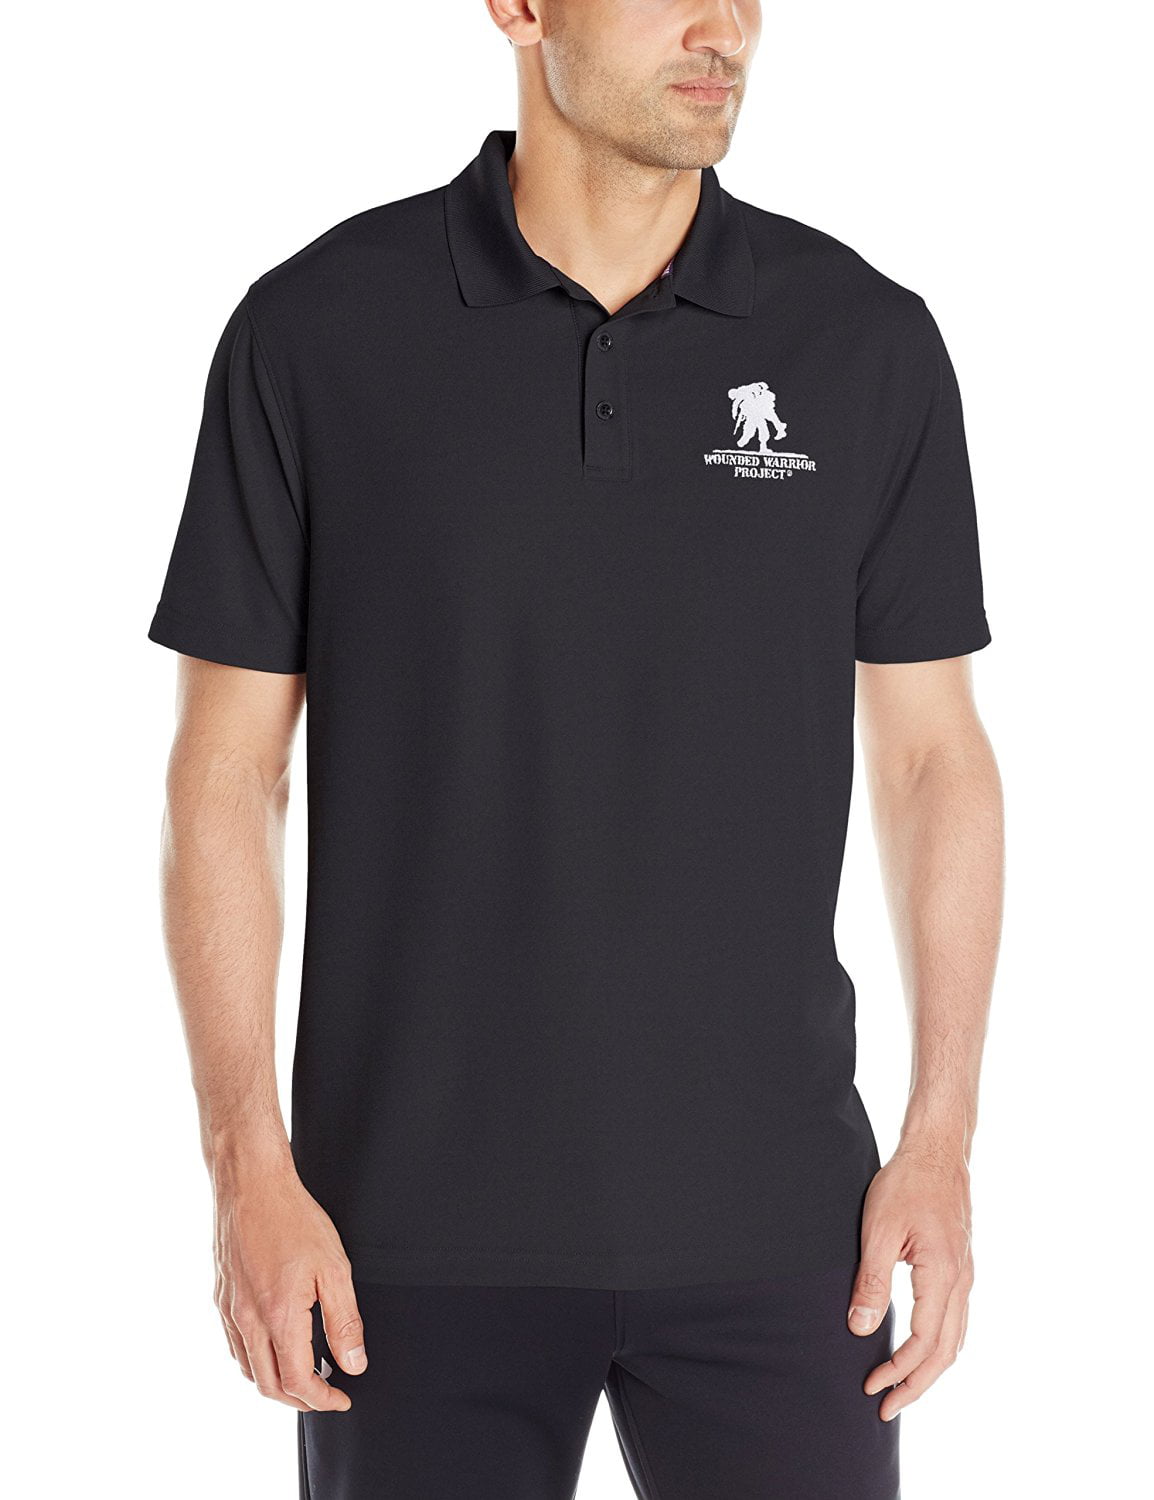 wounded warrior polo shirt